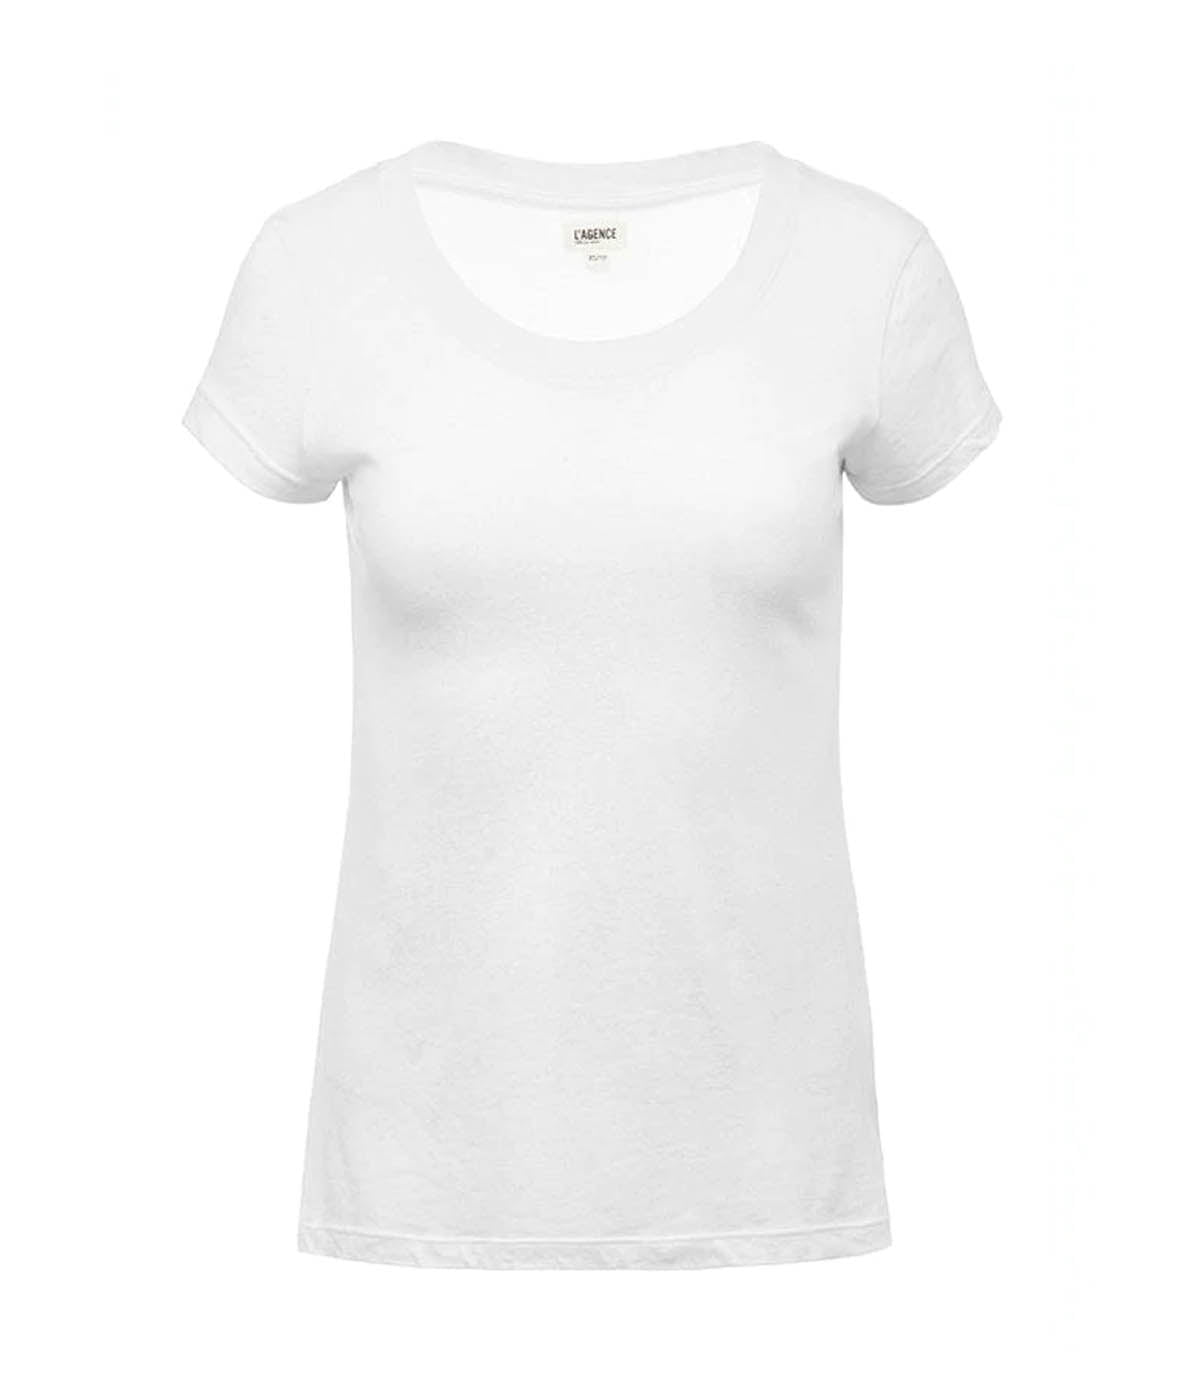 A classic basic white cotton t-shirt, with a u neckline, short sleeve and relaxed fit. Back to basics, everyday tee, stretchy cotton, throw on and go, 100% cotton, bra friendly, made in usa. 